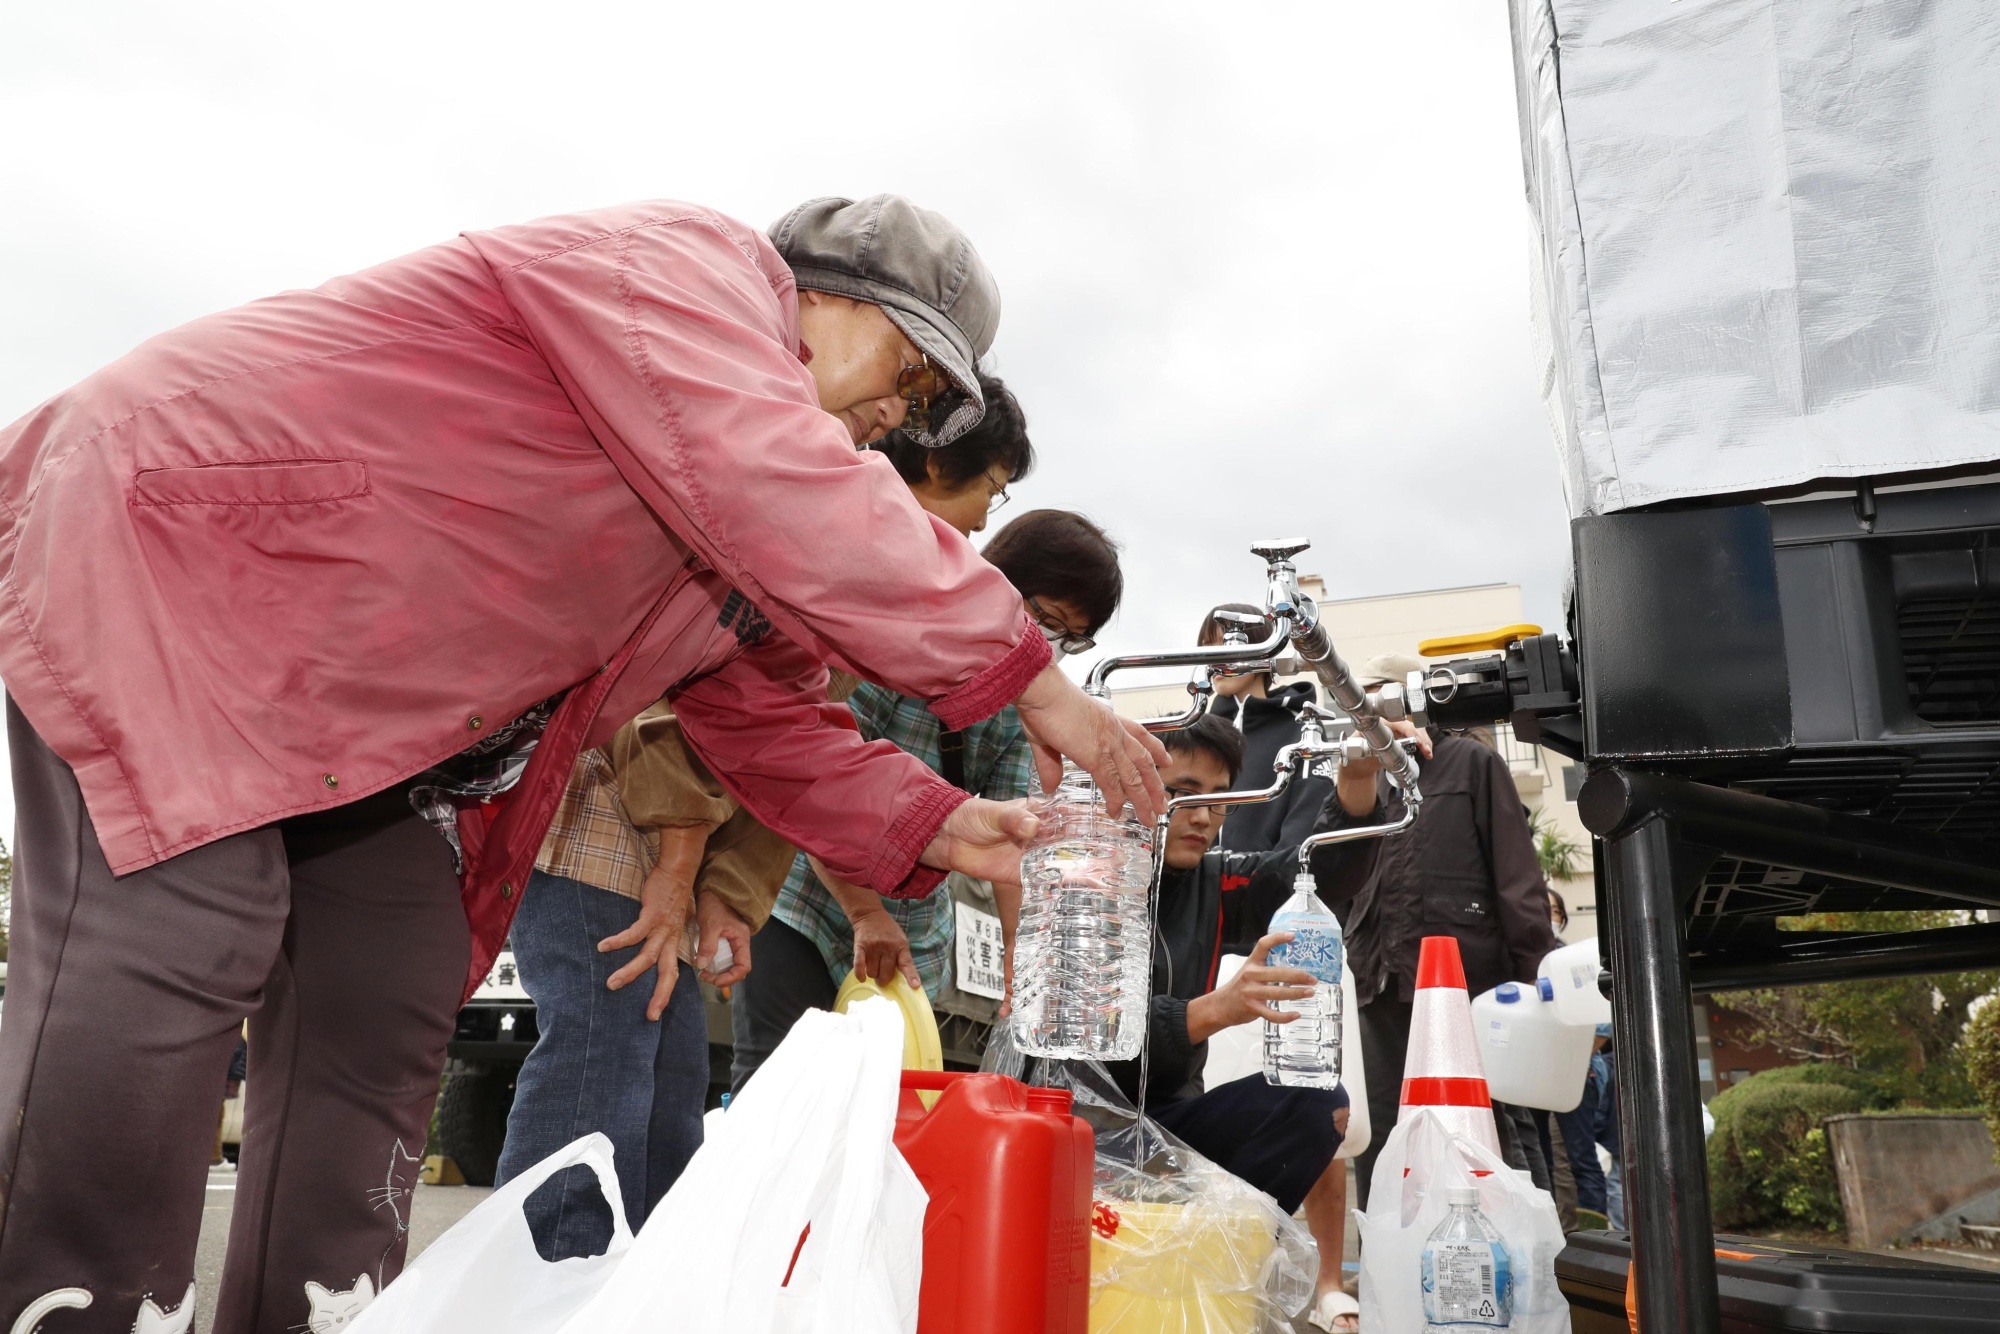 People in the town of Marumori, Miyagi Prefecture, collect water supplies on Tuesday after the entire neighborhood was flooded and homes had their water cut off following Typhoon Hagibis. | KYODO